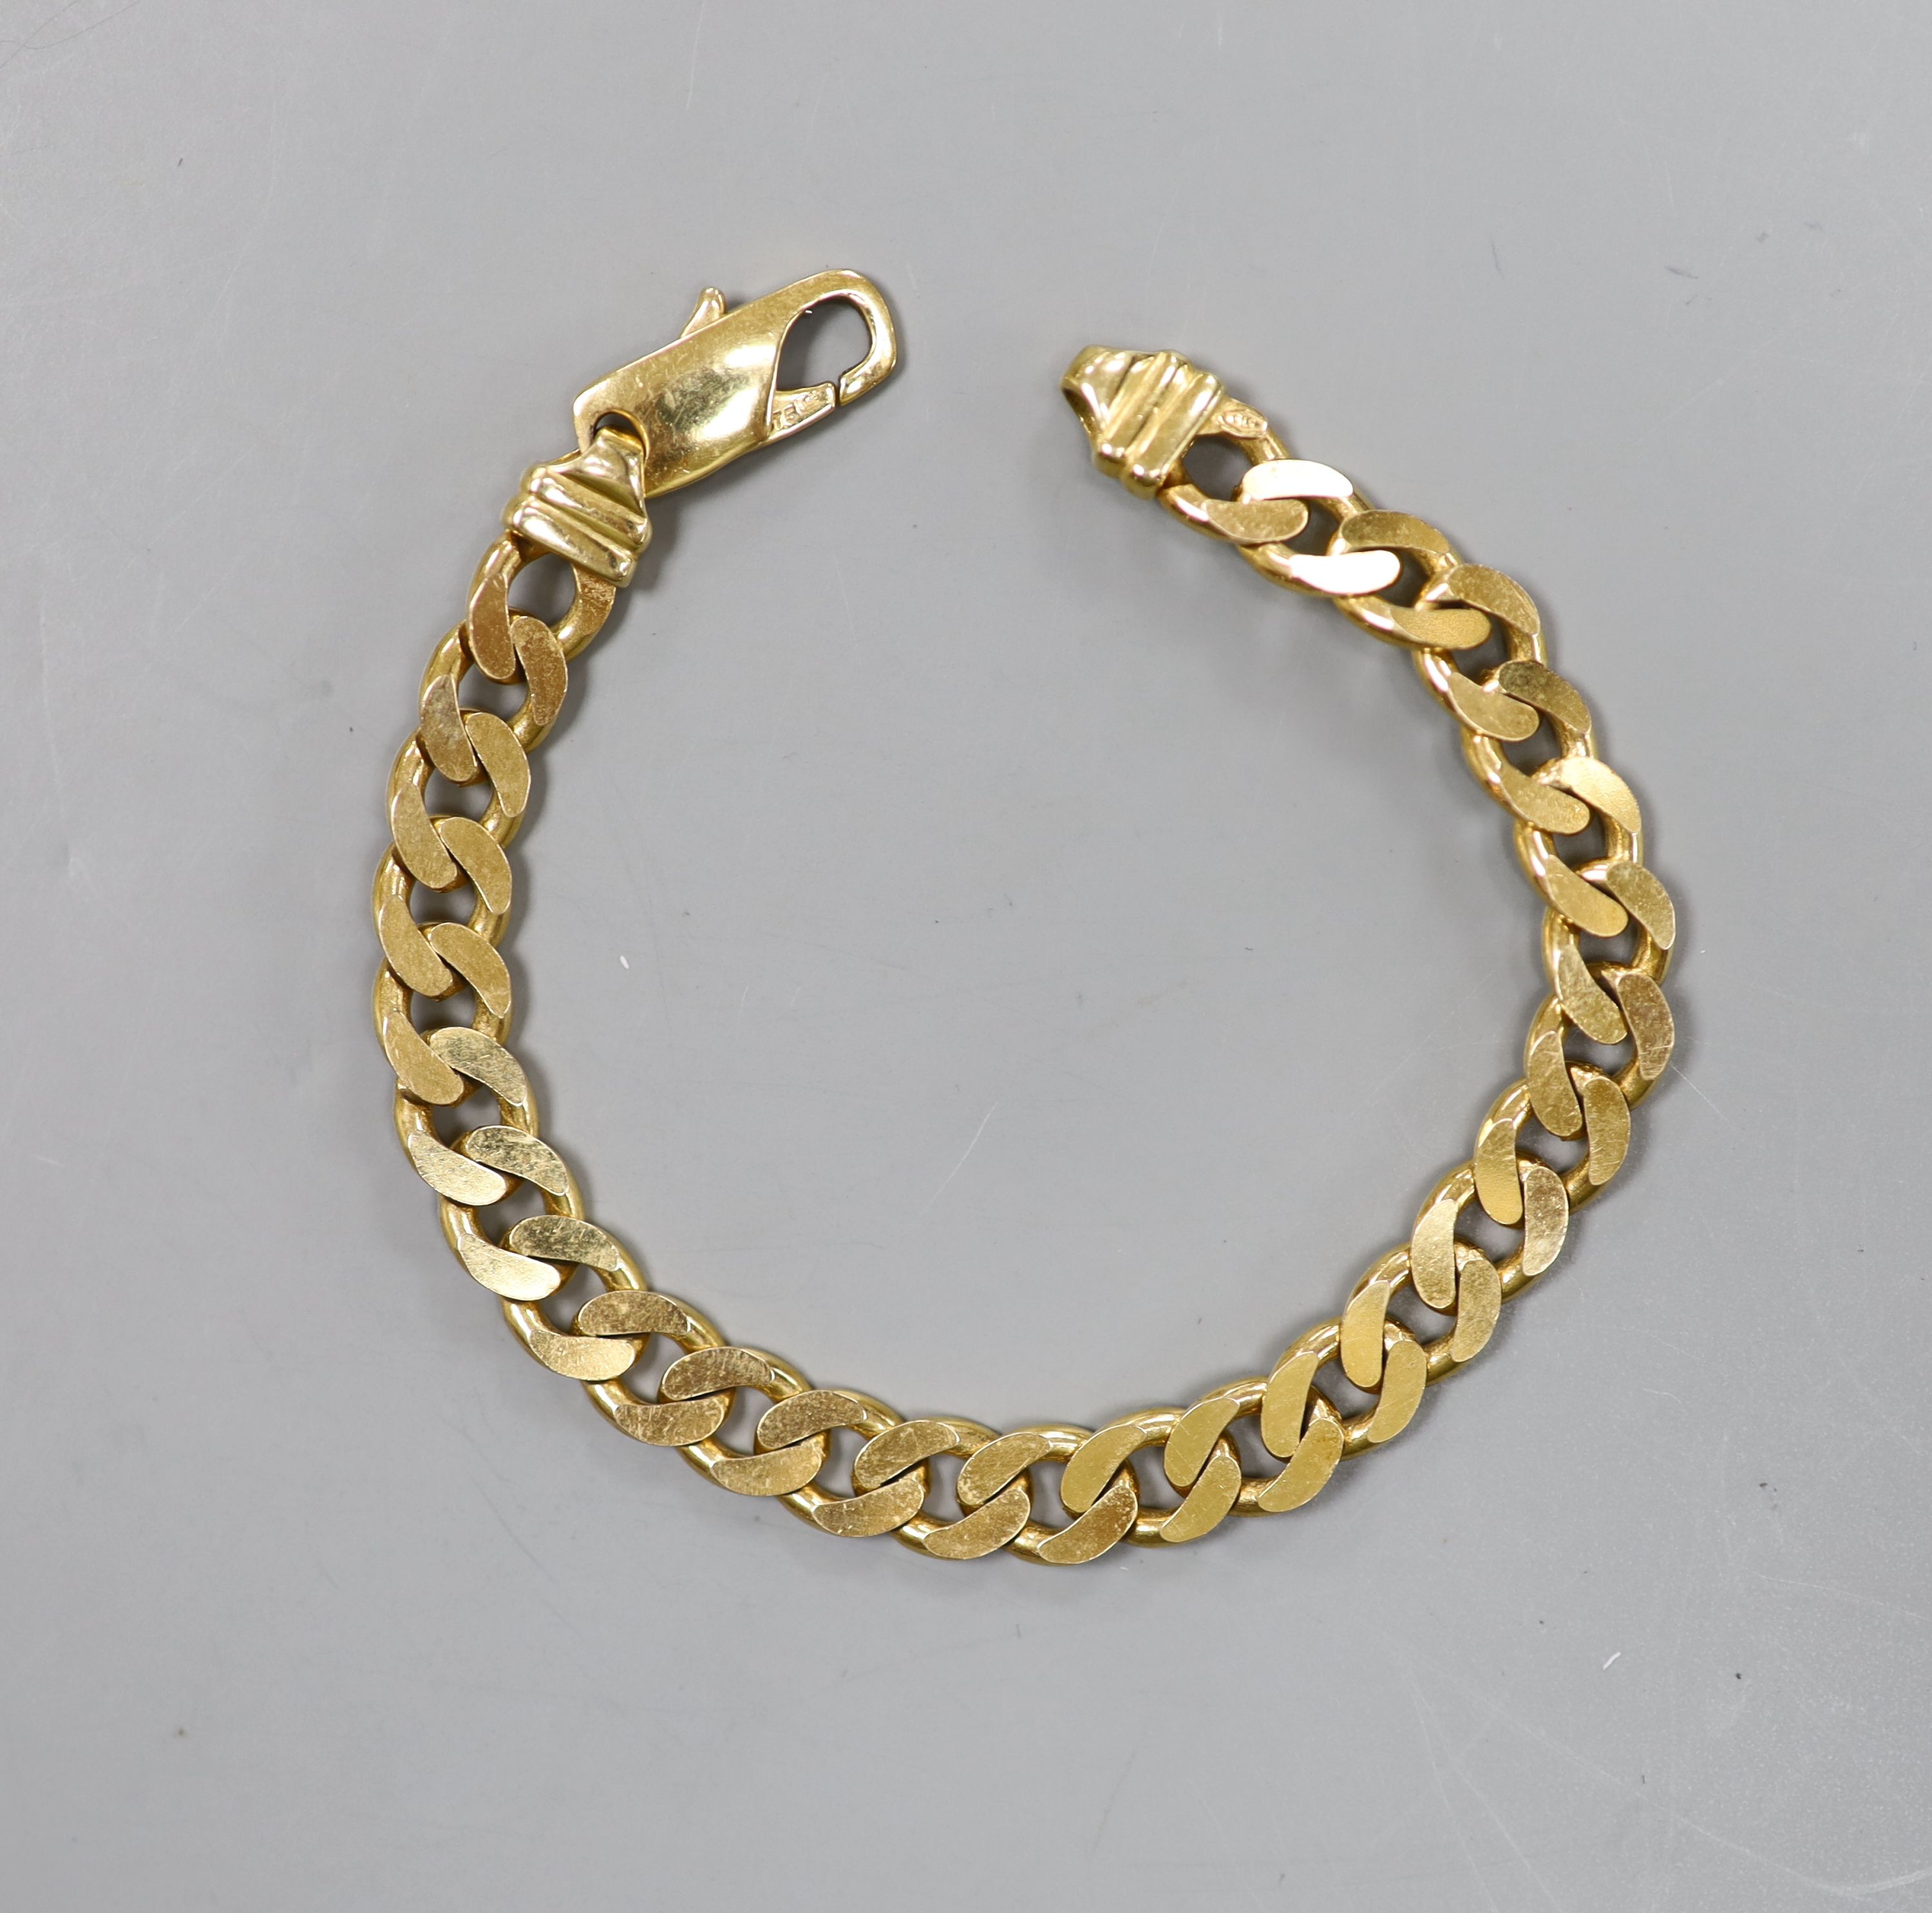 A 9ct gold curb-link bracelet with trigger clasp, 25.8g